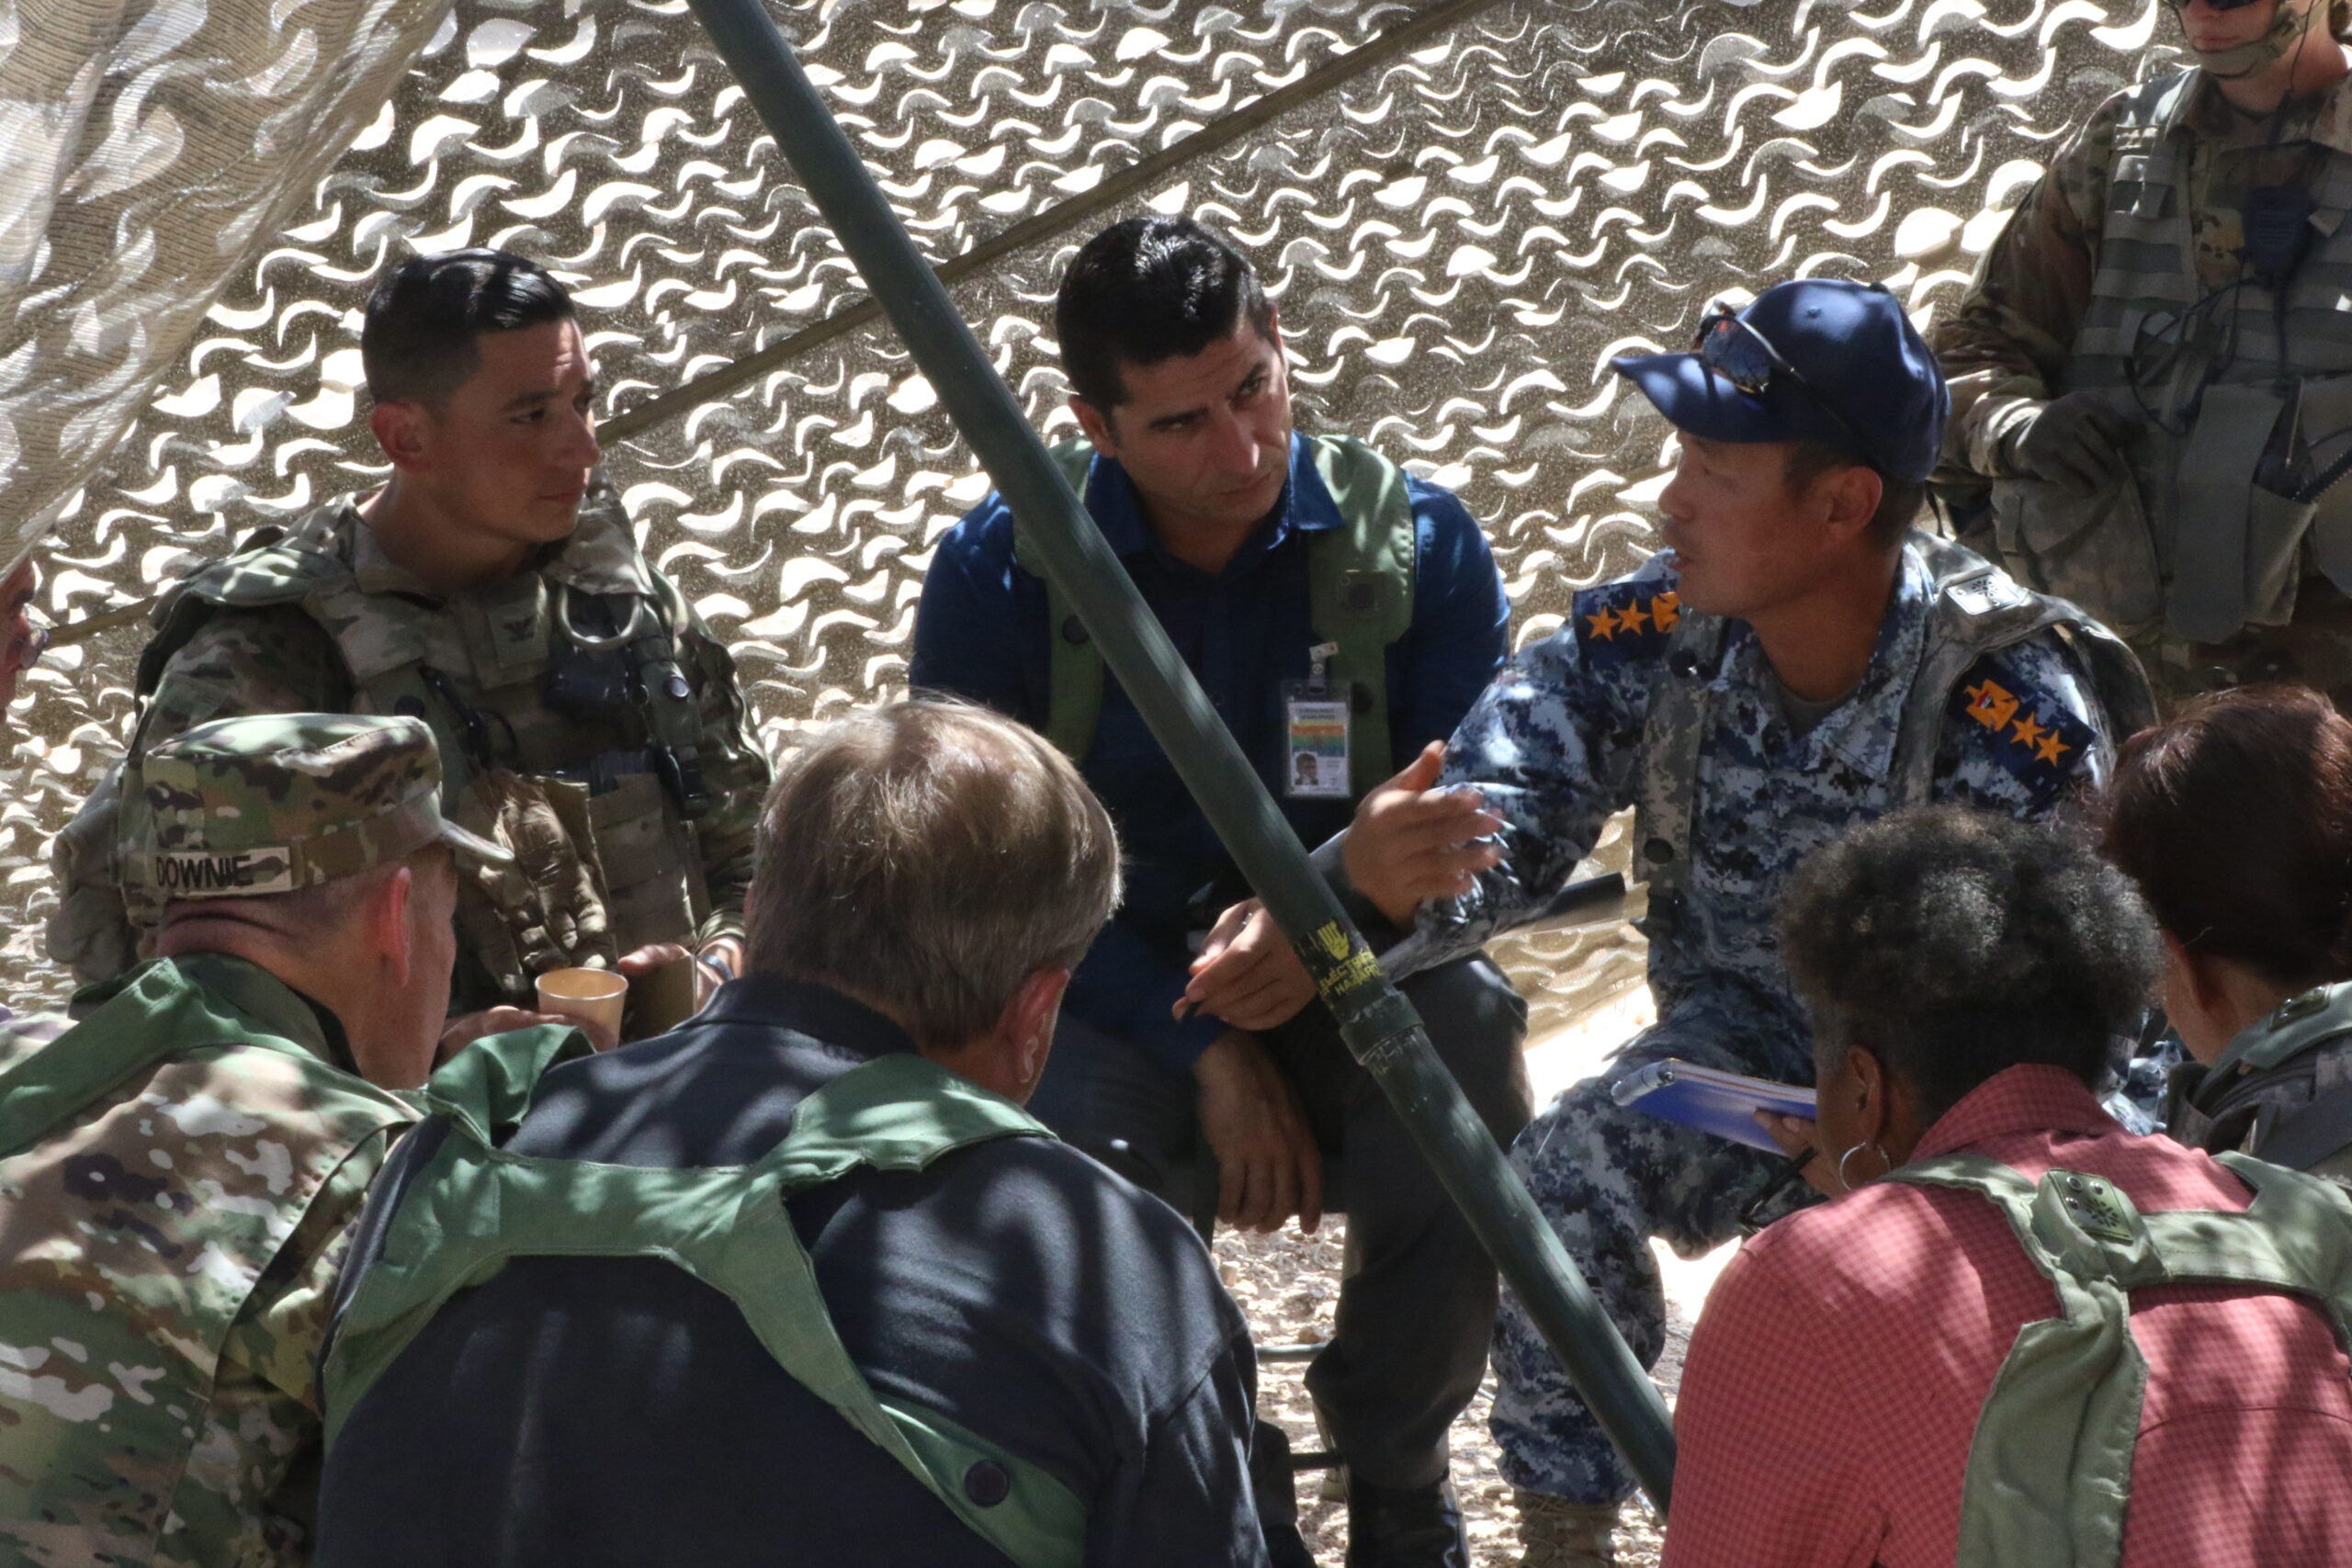 Col. Jonathan Chung, commander of 2-2 Stryker Brigade Combat Team, speaks with the Provincial Chief of Police and Department of State officials of a fictional country they're deployed to during a Key Leader Engagement at National Training Center in Fort Irwin, Ca on 2 Sep.